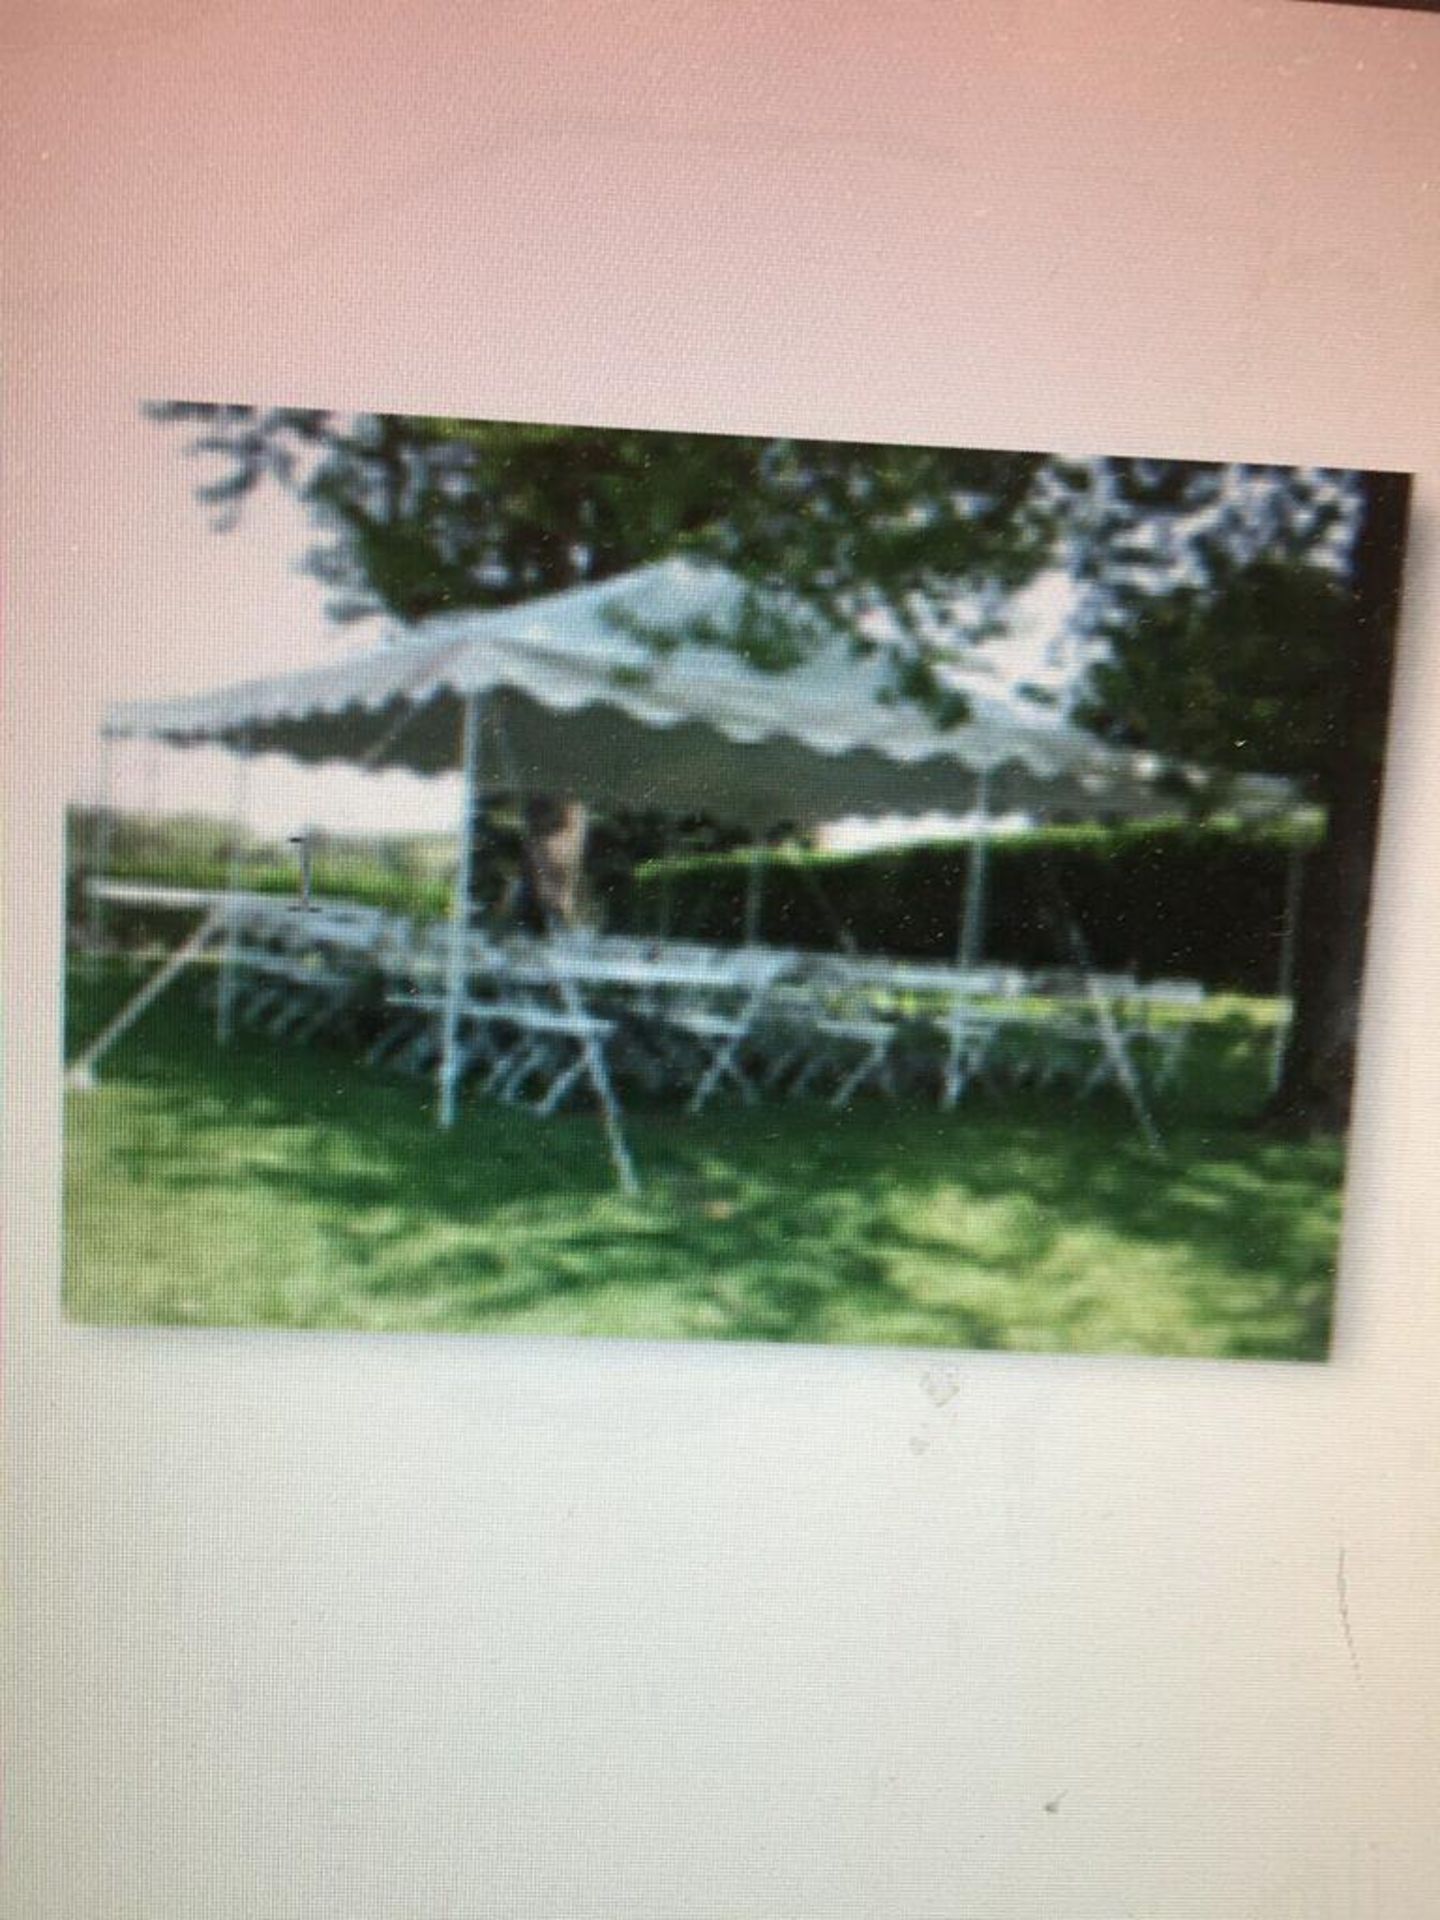 16' x 16' white canopy tent, complete with poles, stakes, and straps etc. - Image 4 of 4